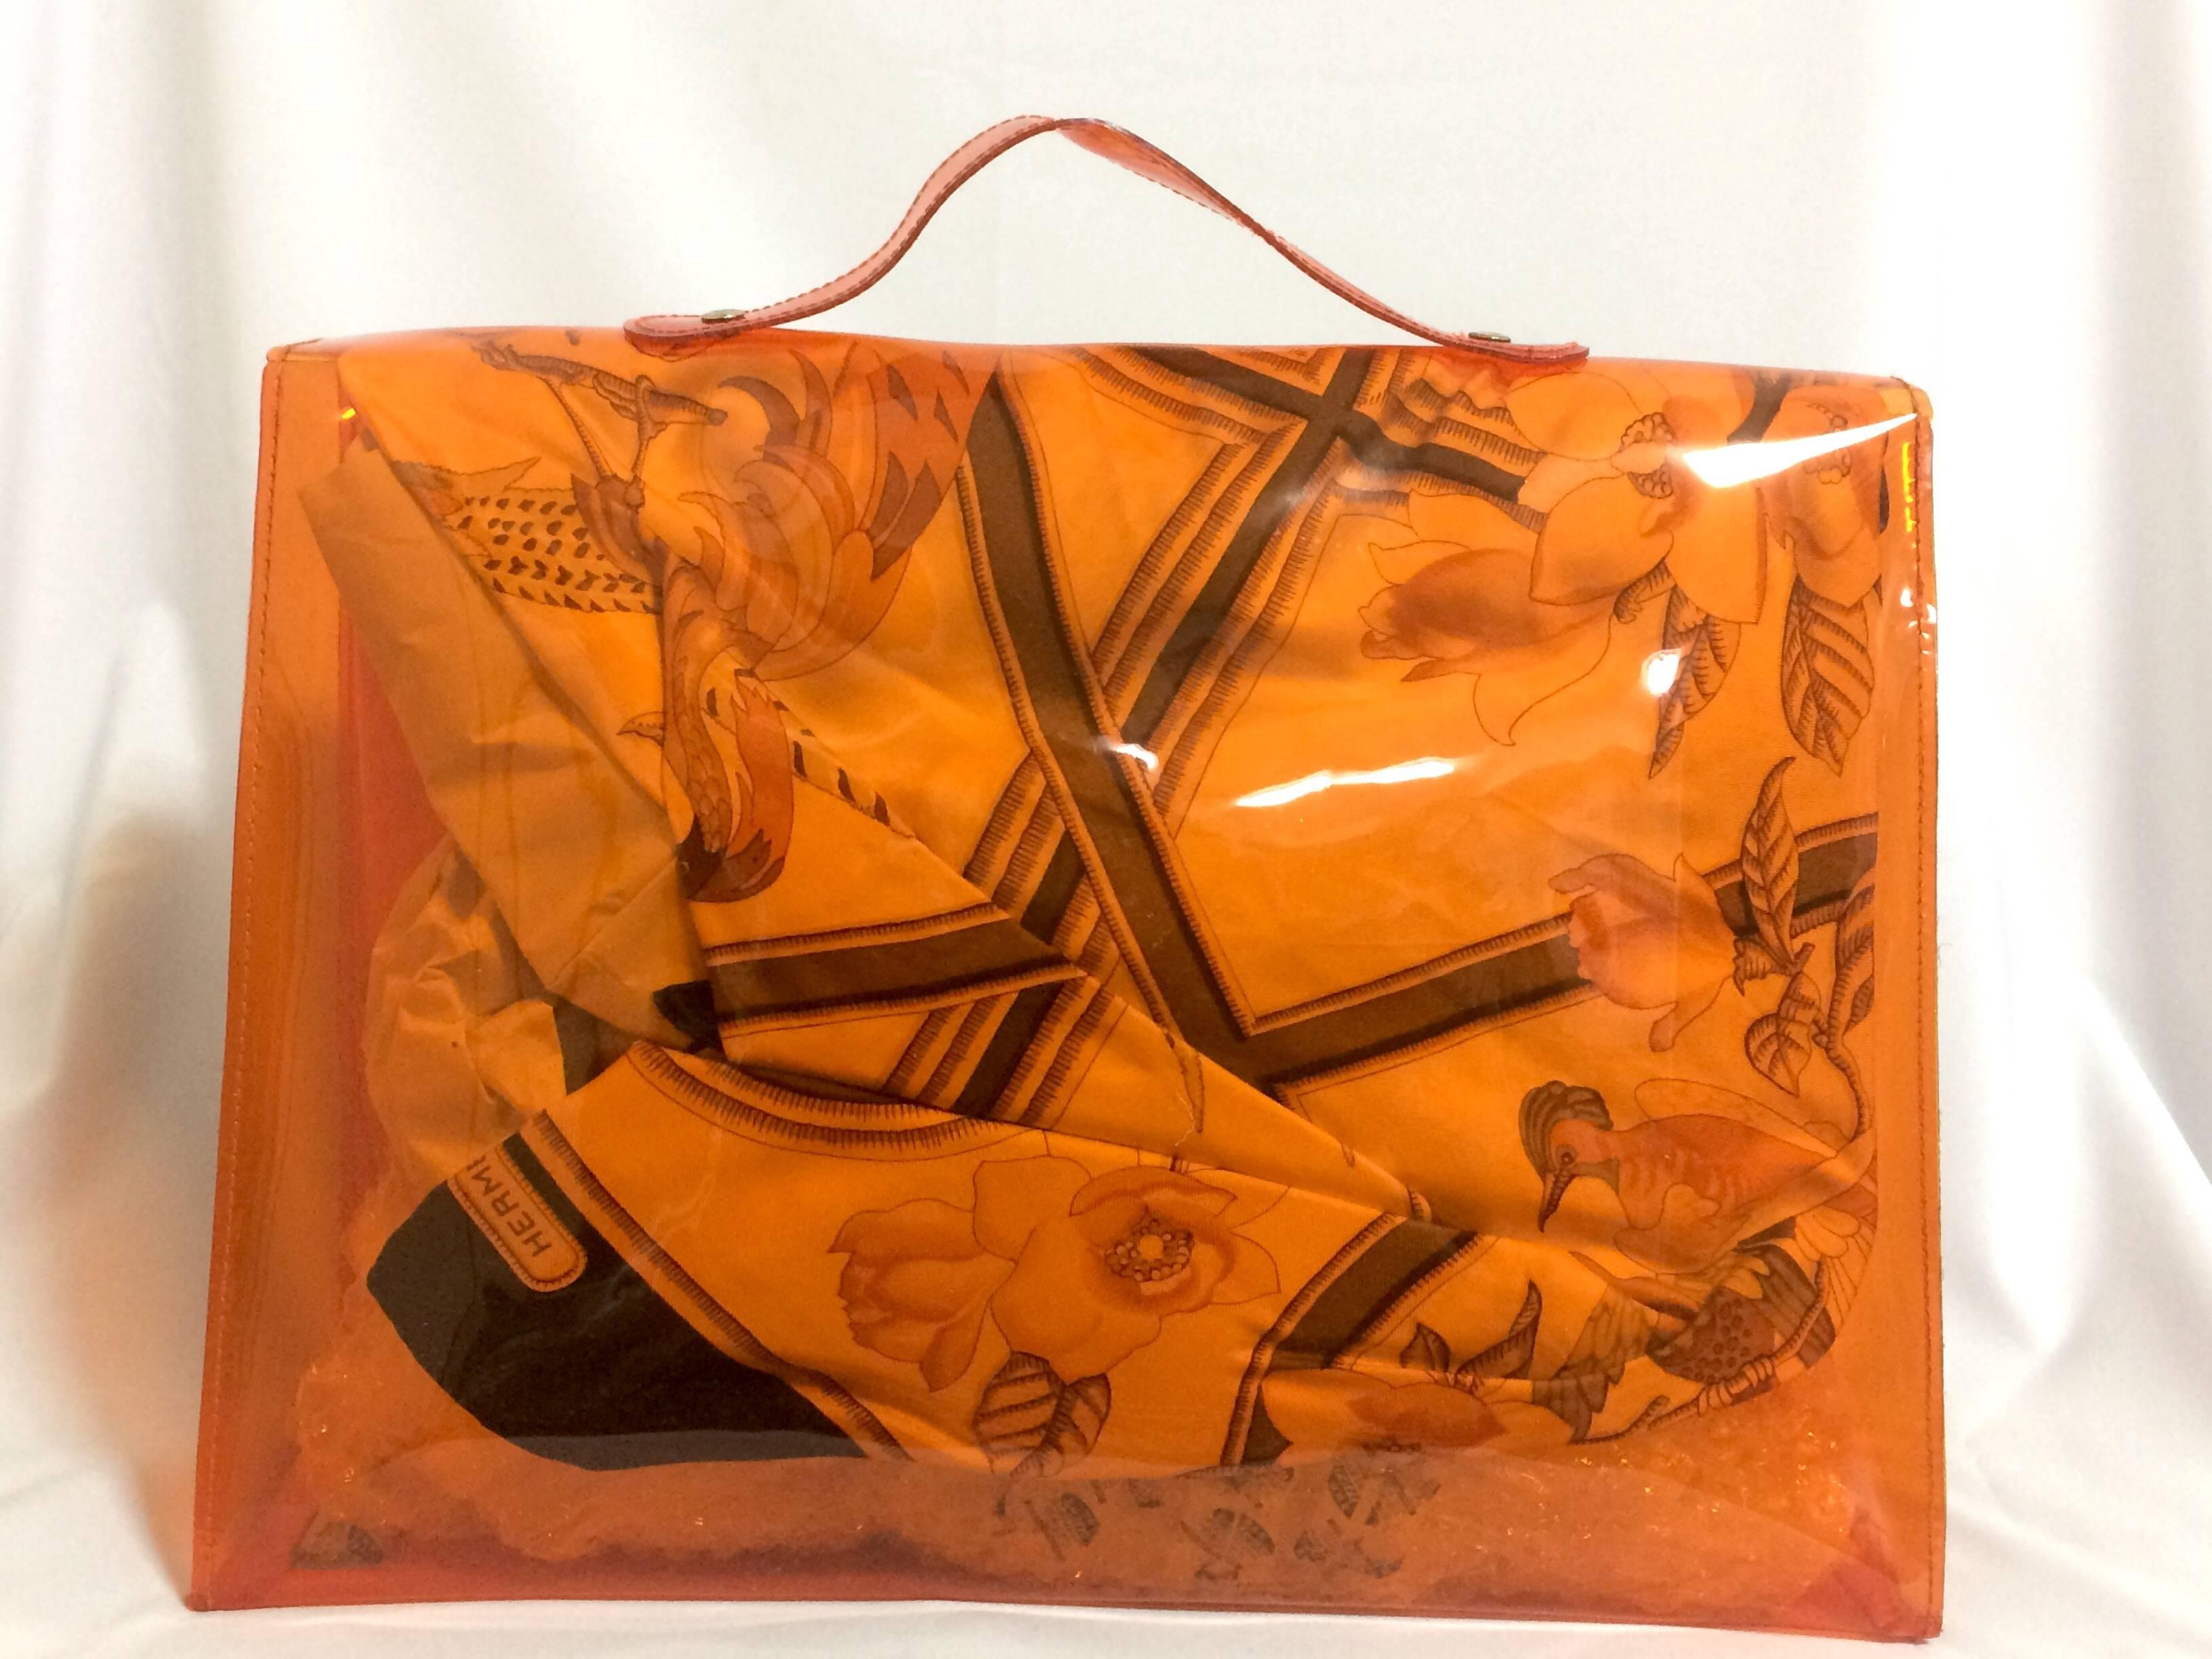 1990s. Vintage Hermes a rare transparent orange vinyl Kelly style beach bag. Limited Edition. 

1990s. MINT condition. Hermes a rare transparent Vintage orange vinyl Kelly bag Japan Limited Edition, Sold at Japan Department Store.

SPECIAL piece for